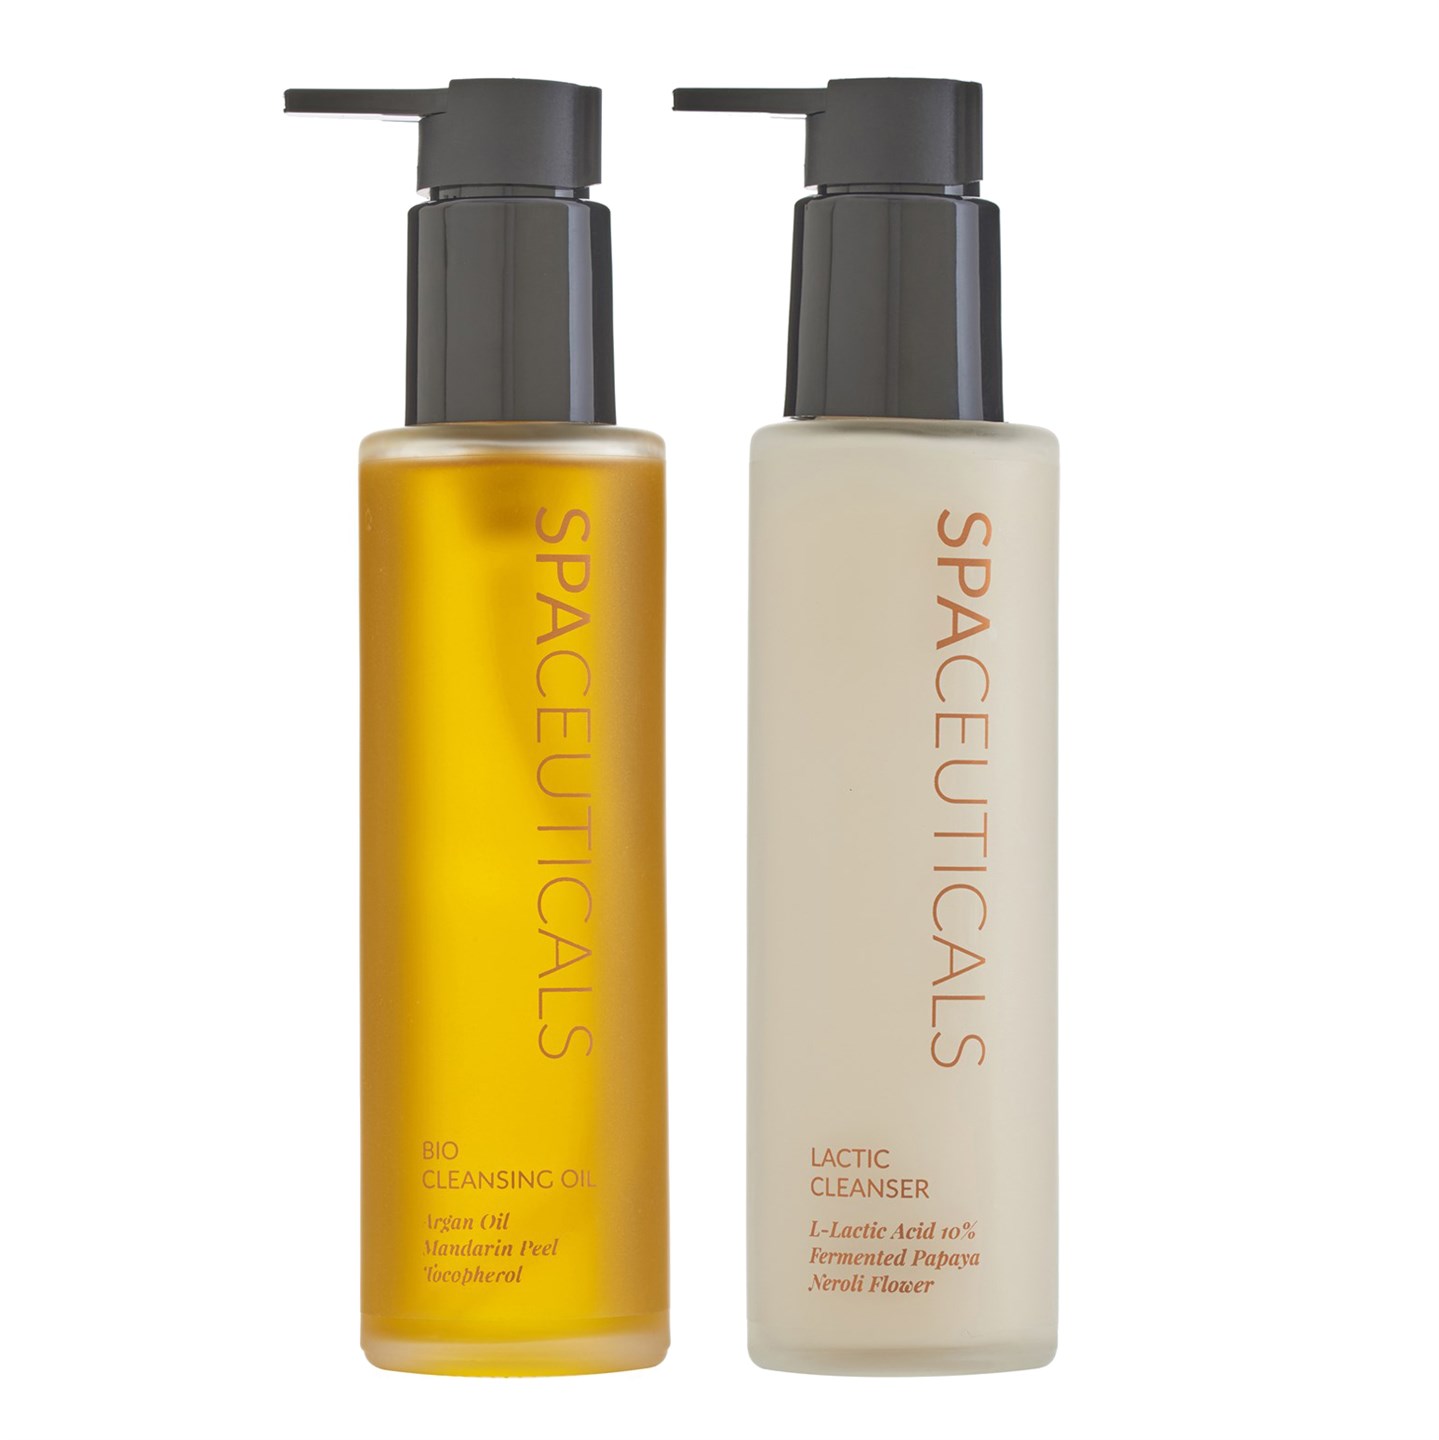 SpaCeuticals Bio Cleansing Oil and Lactic Cleanser Duo